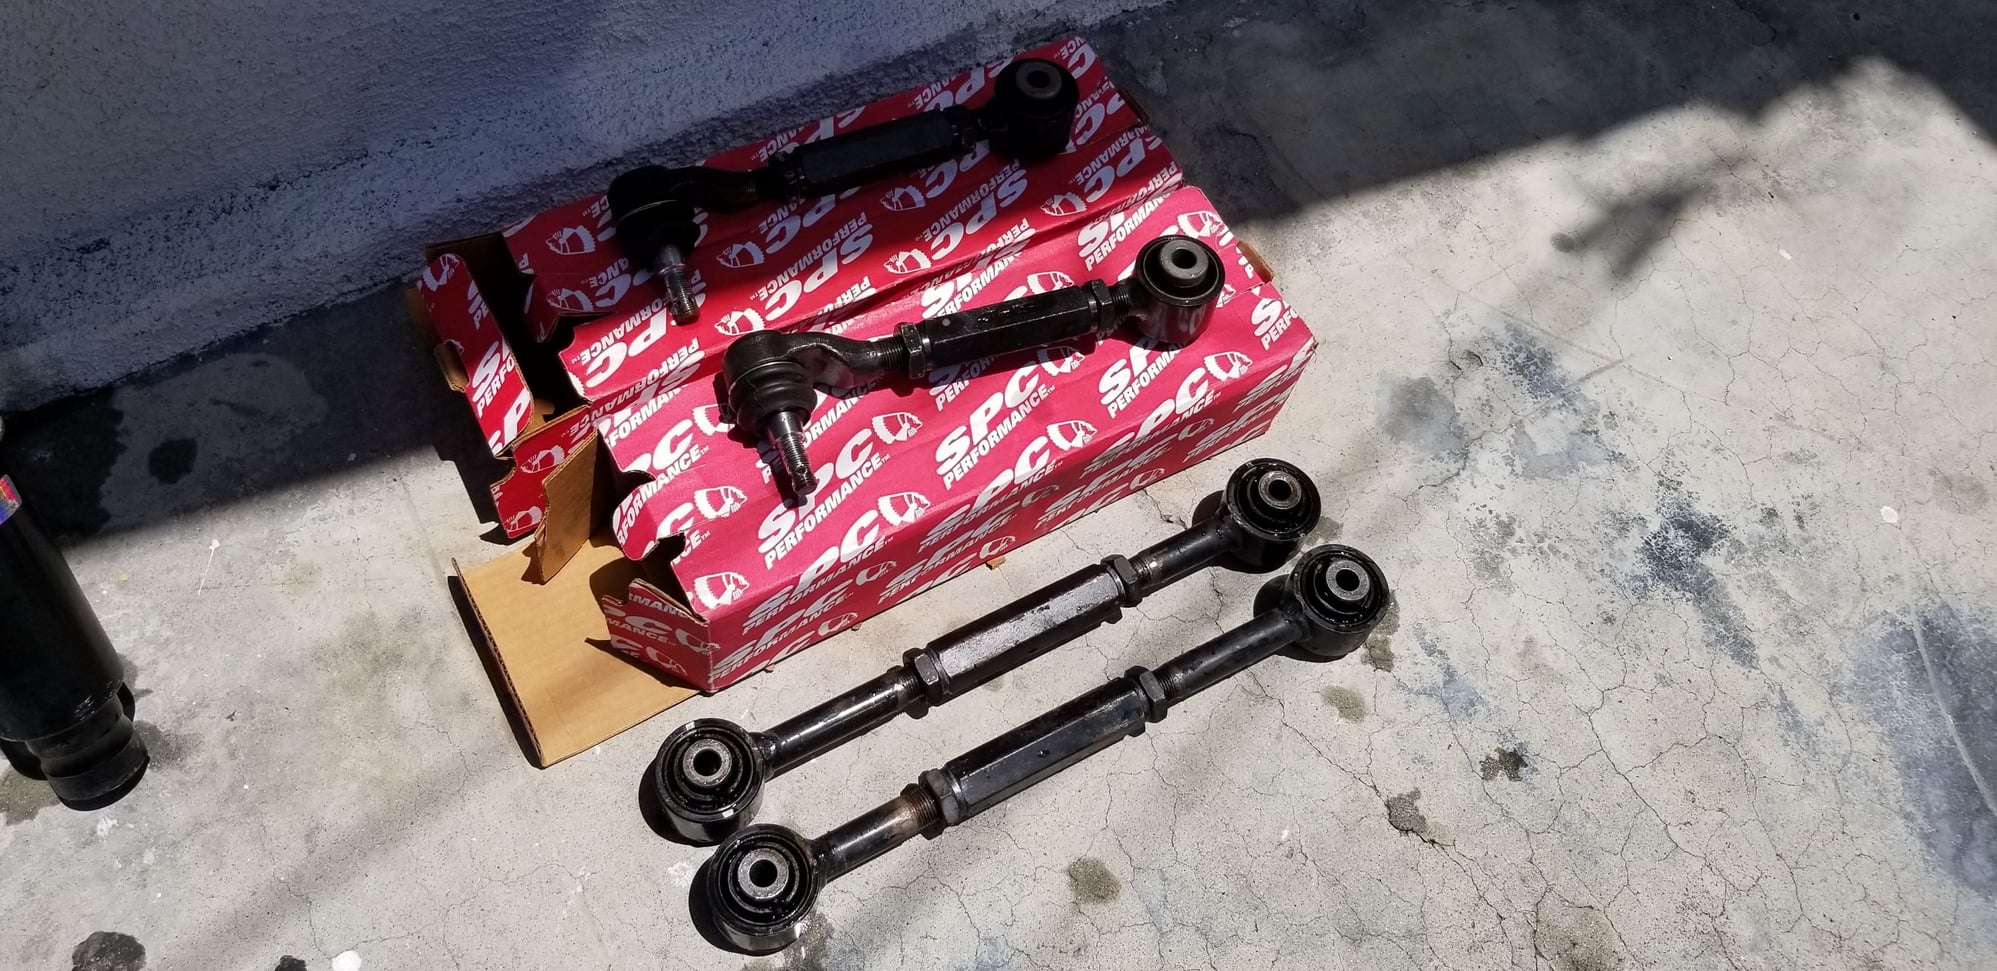 Miscellaneous - FS: 3G aftermarket suspension parts / Enkei RPF1 - Used - 2004 to 2008 Acura TL - Westminster, CA 92683, United States